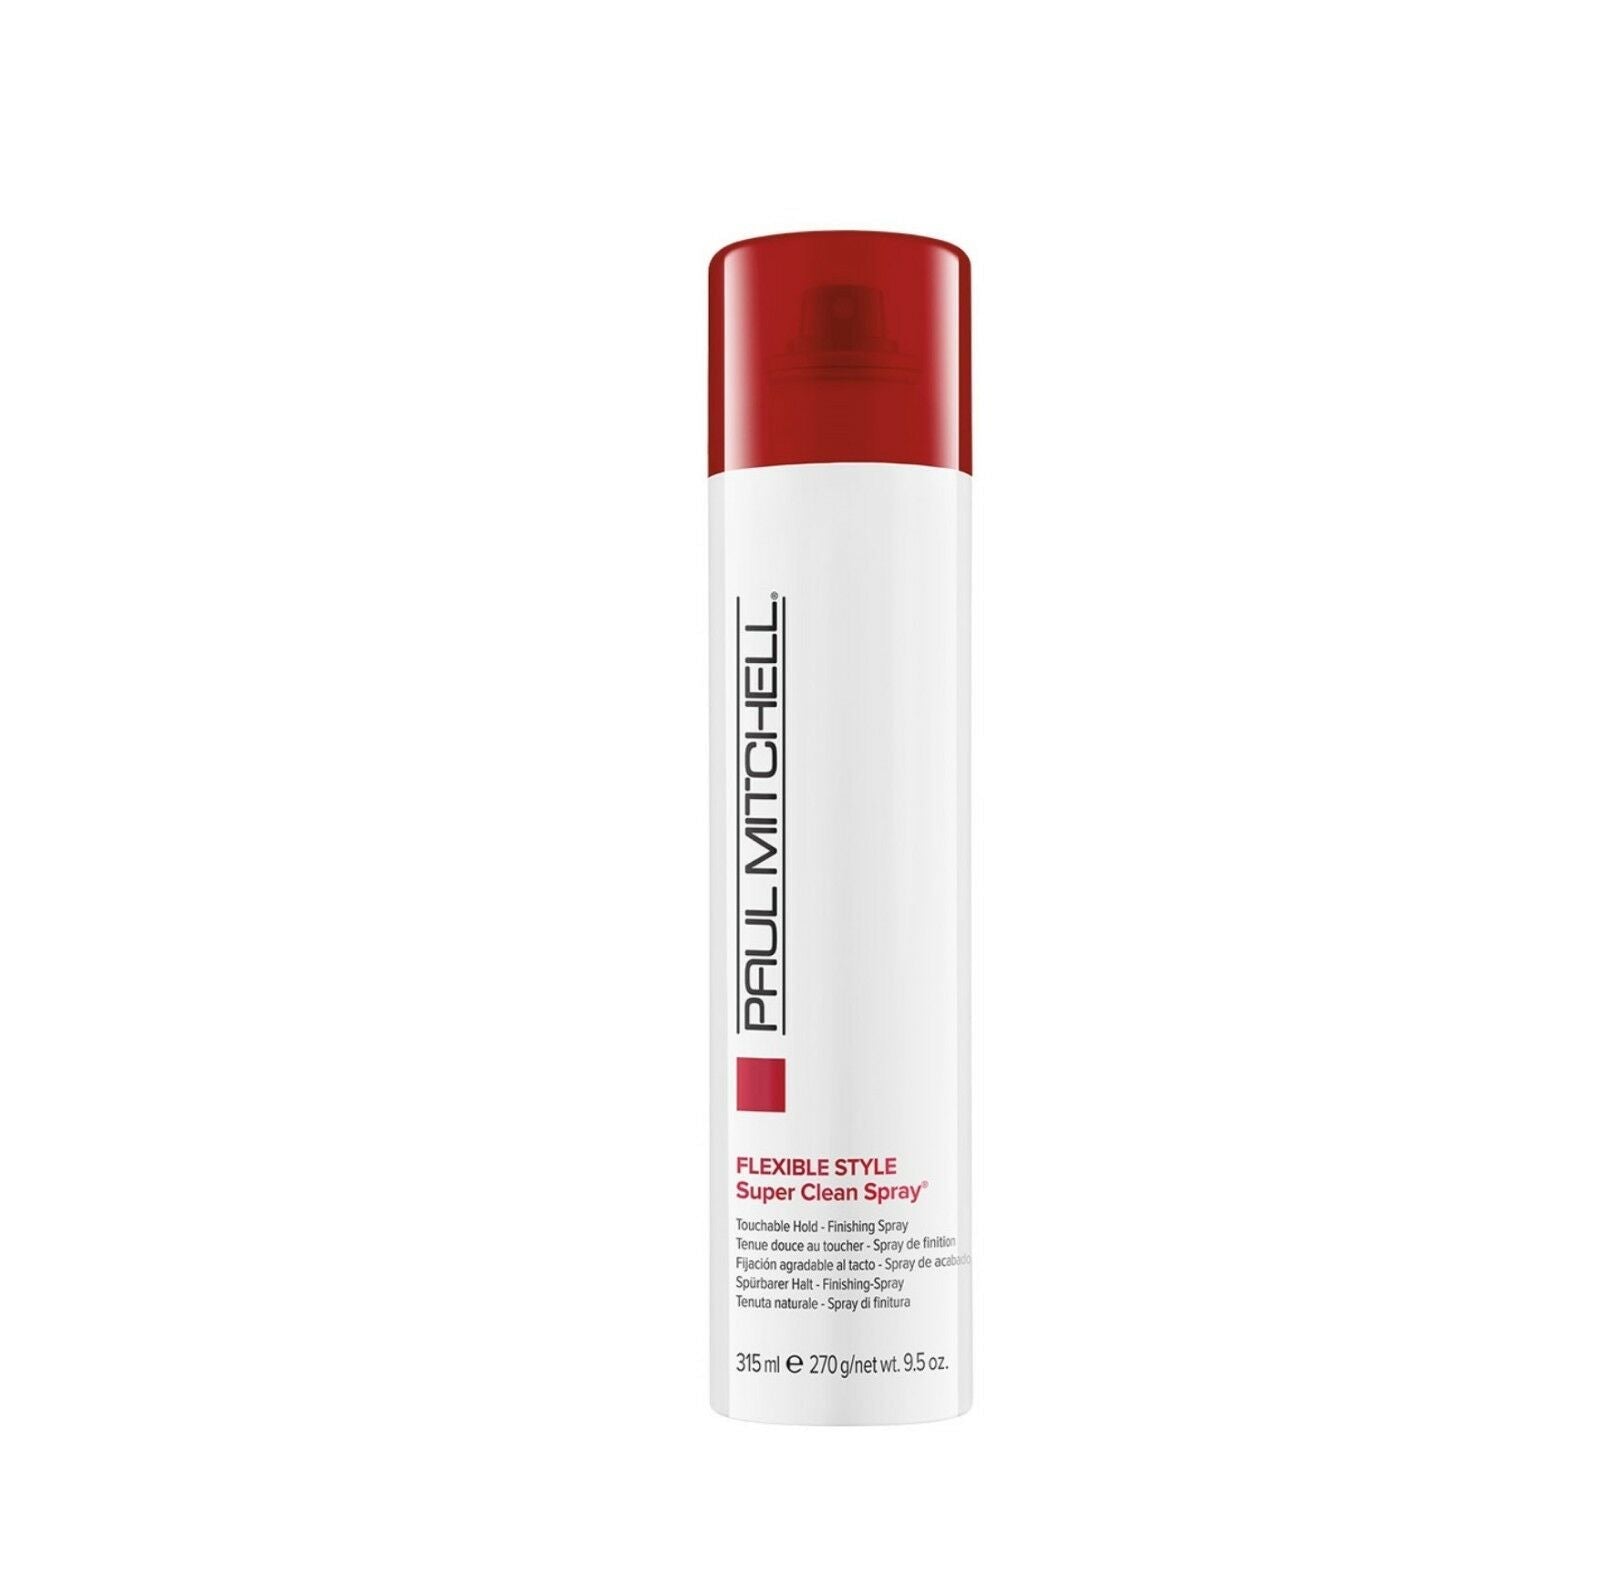 Paul Mitchell Super Clean Spray Touchable Hold Finish 315ml x 2 - On Line Hair Depot